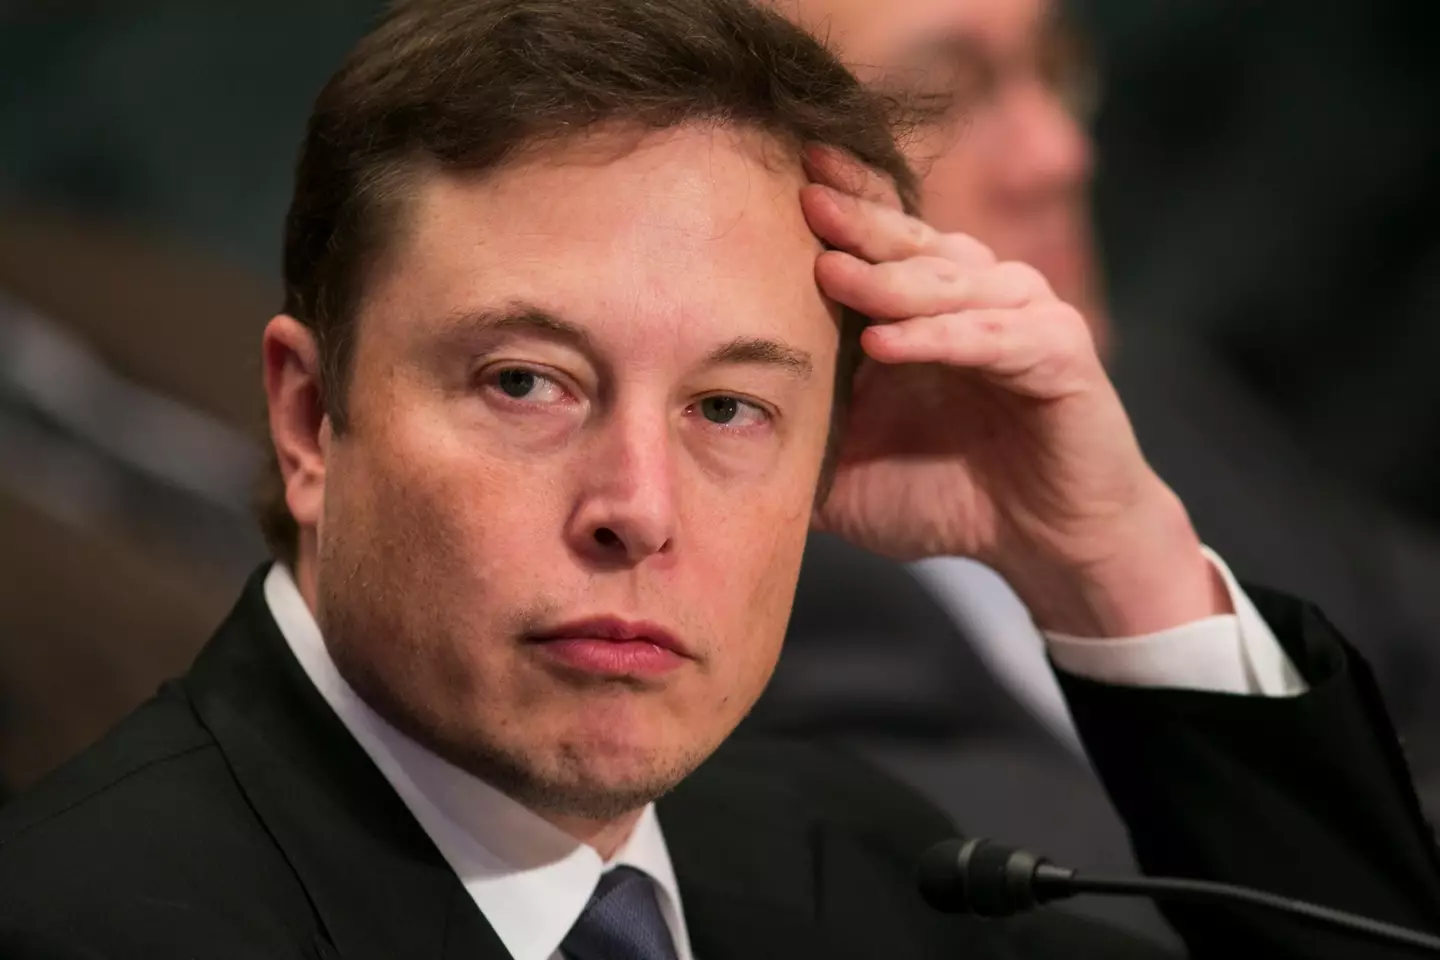 Elon Musk attempted to pull out of the Twitter deal in July.